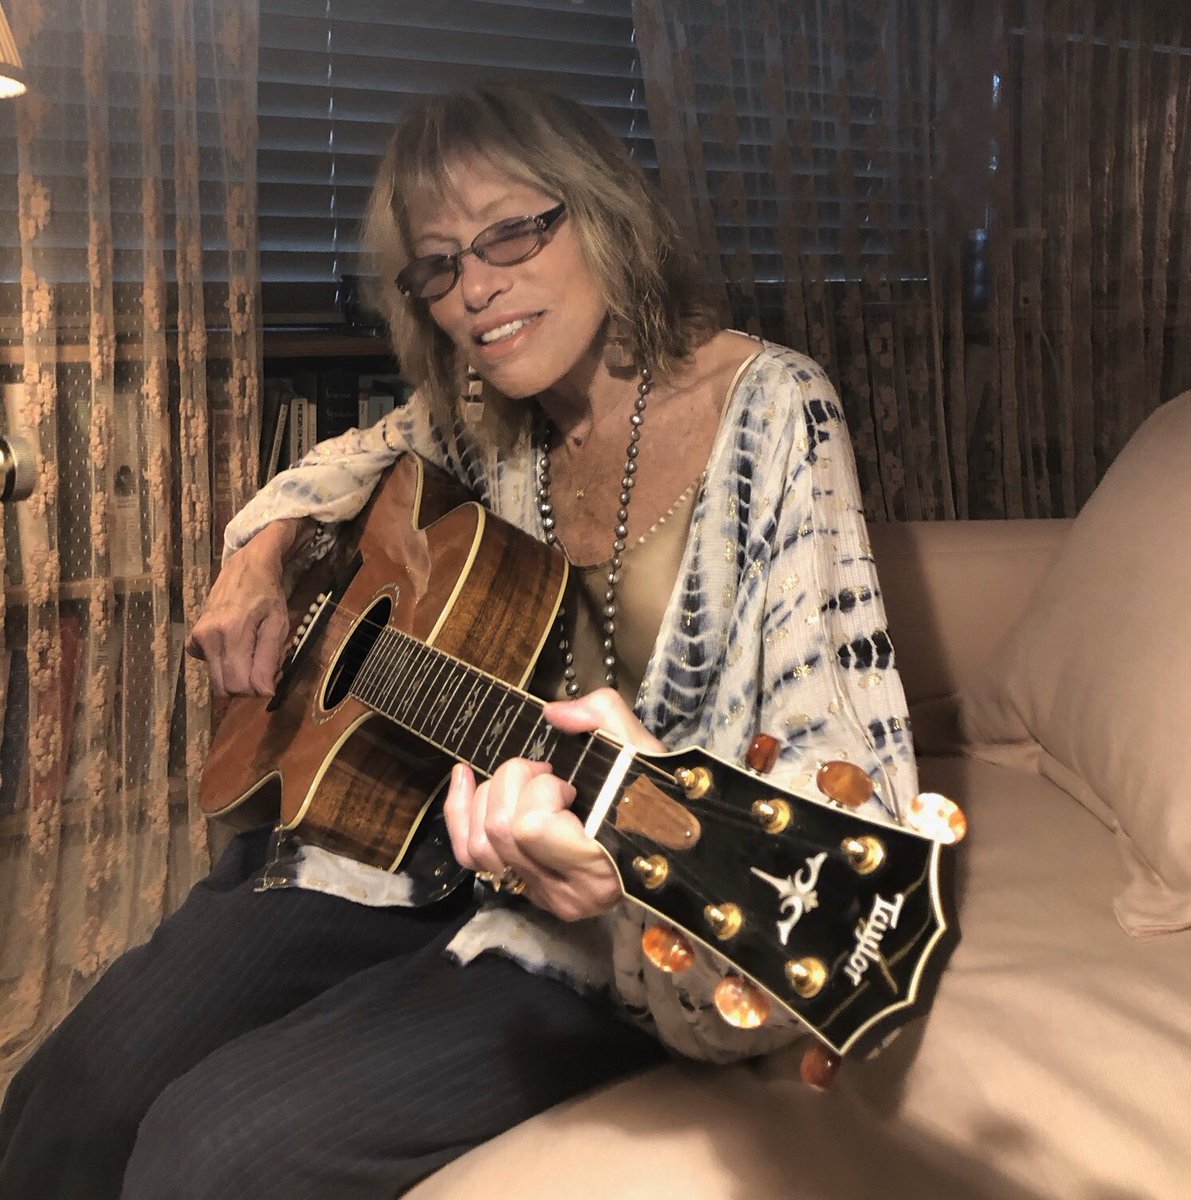 Carly Simon on X: Me and my guitar capturing some new words and